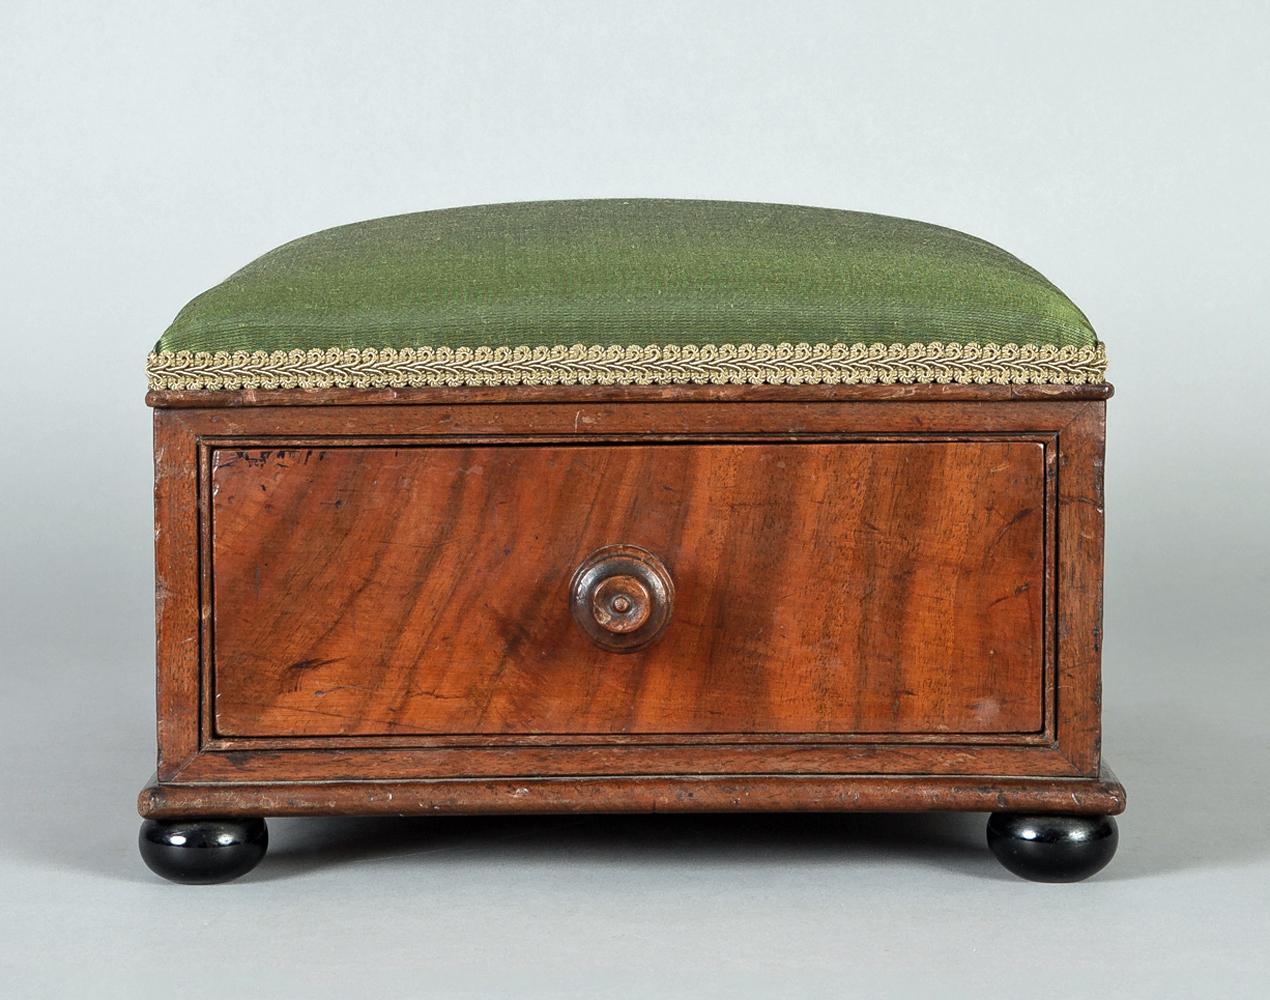 A Victorian mahogany footstool with a drawer that runs the depth of the stool with a turned wooded knob, covered in green silk and mounted on ebonized bun feet.